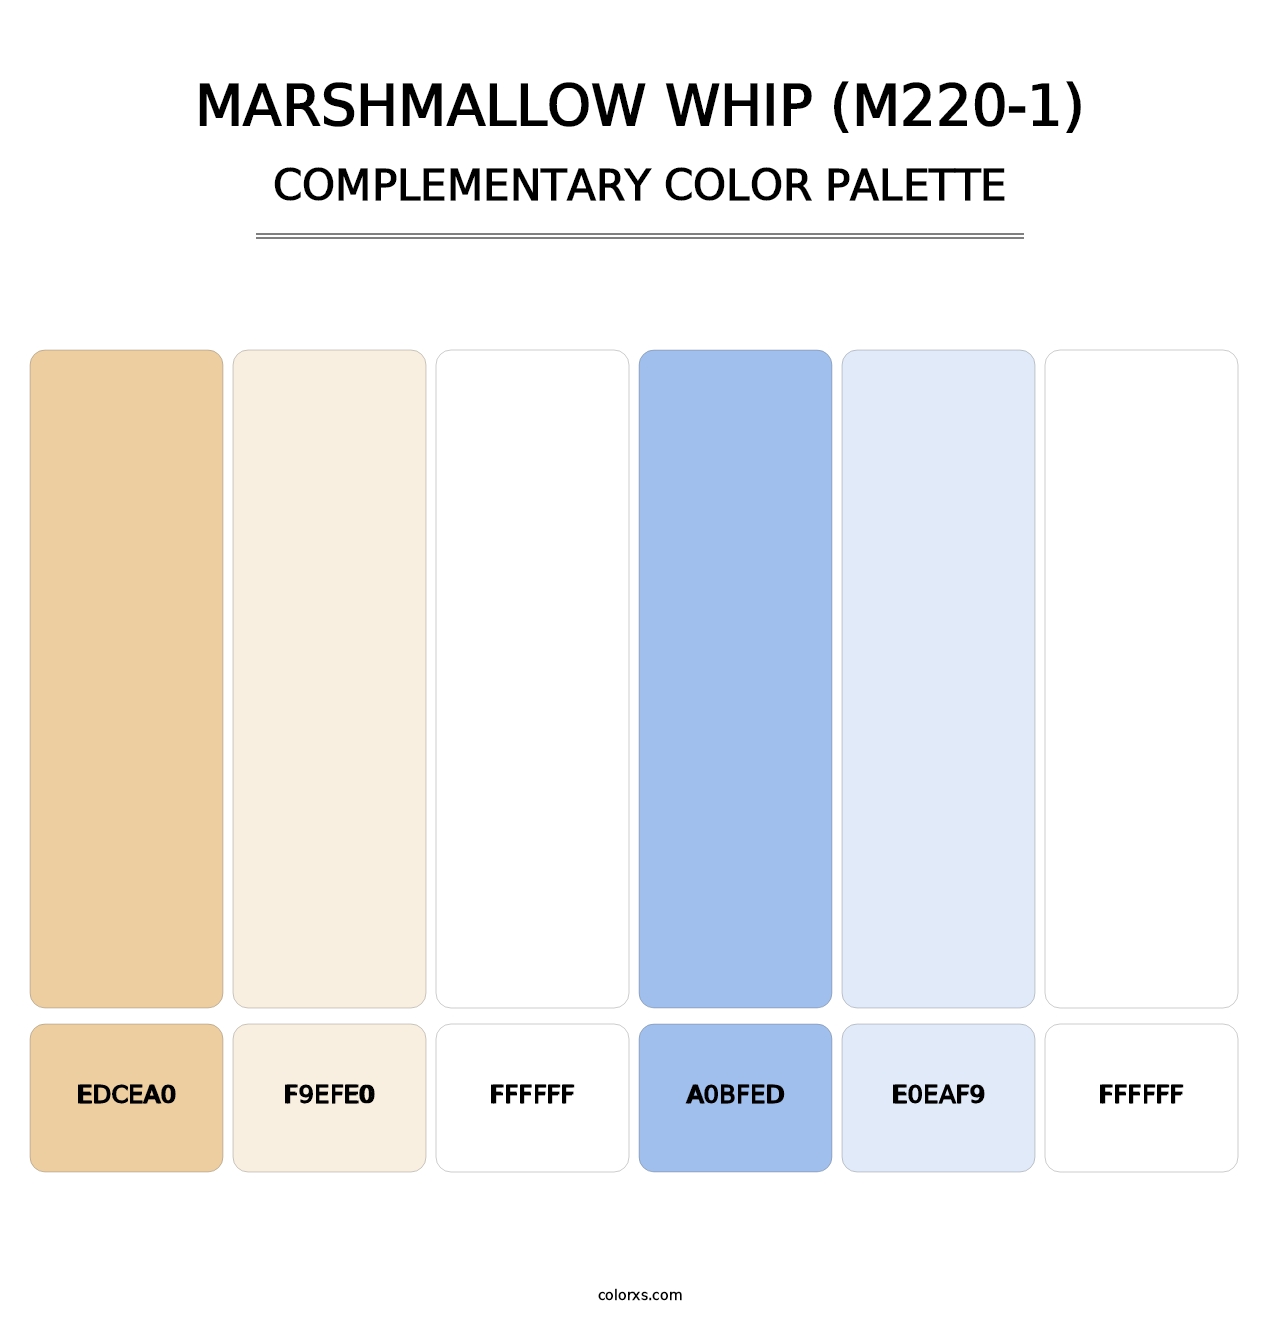 Marshmallow Whip (M220-1) - Complementary Color Palette